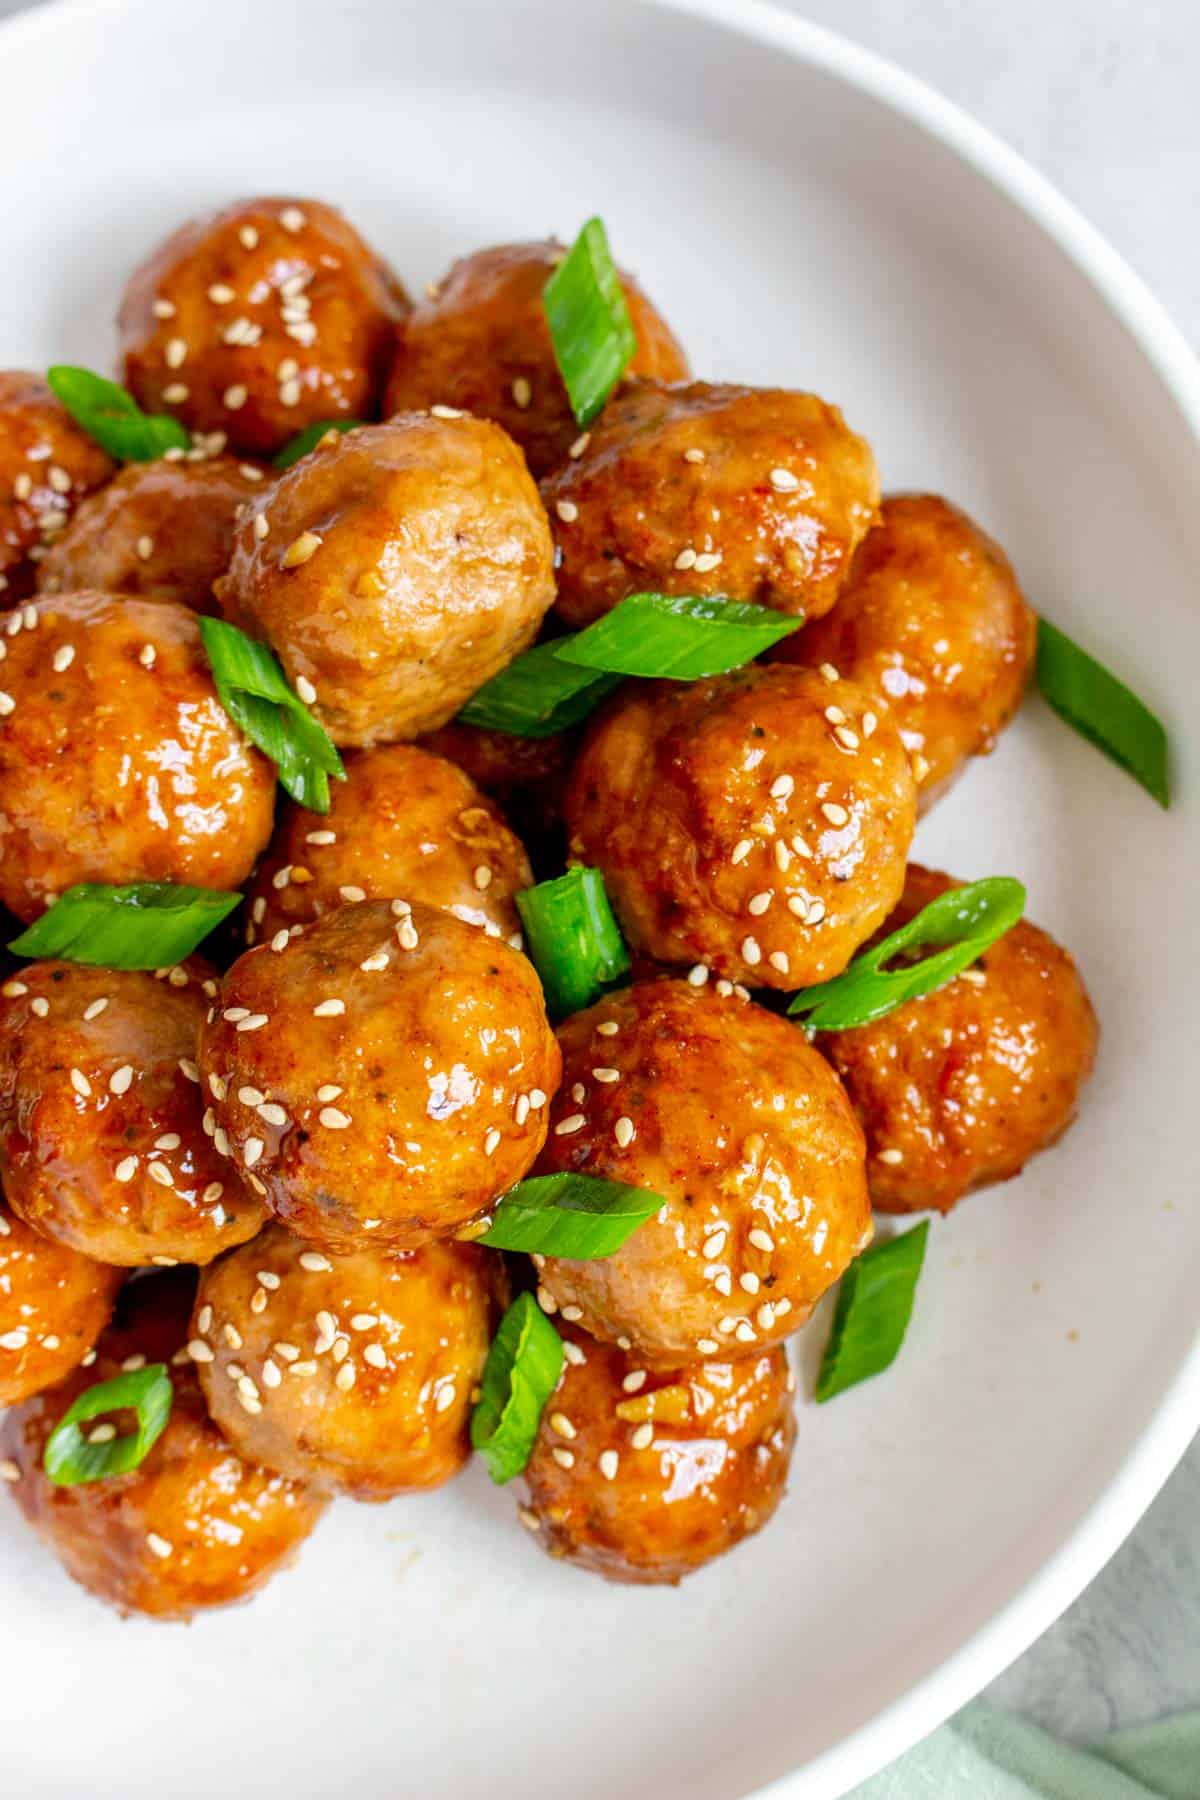 Overhead view of a pile of teriyaki turkey meatballs on a plate with green onions and sesame seeds.